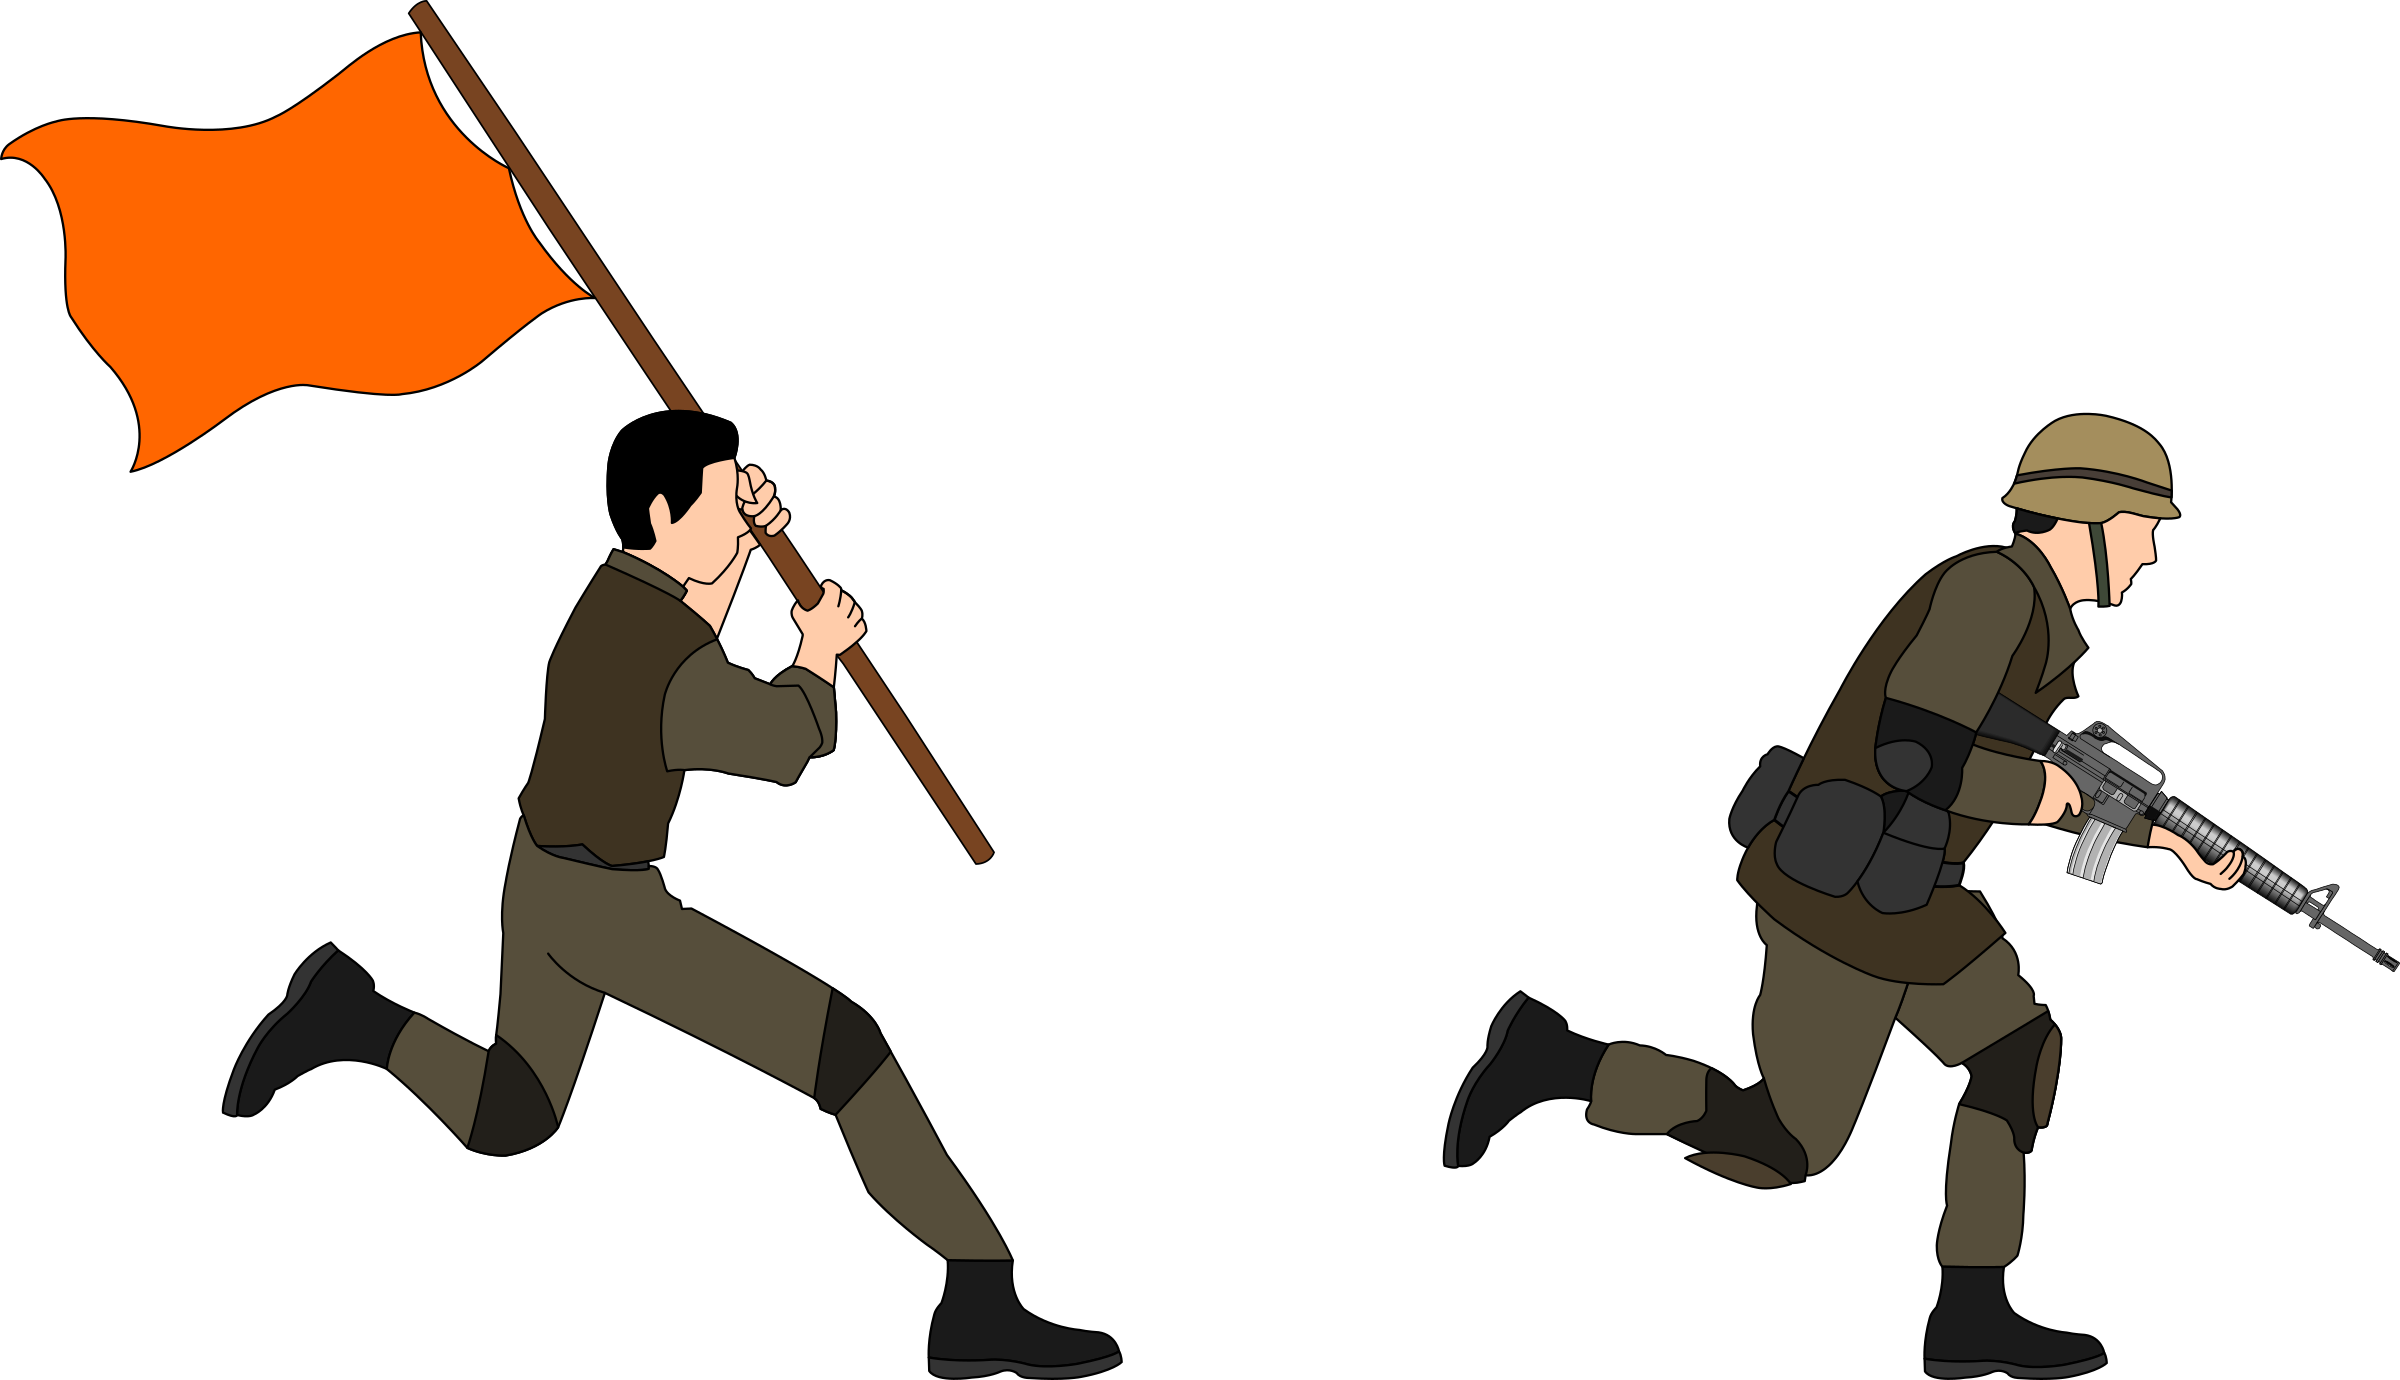 Charging Soldiers Vector Clipart image Free stock photo 